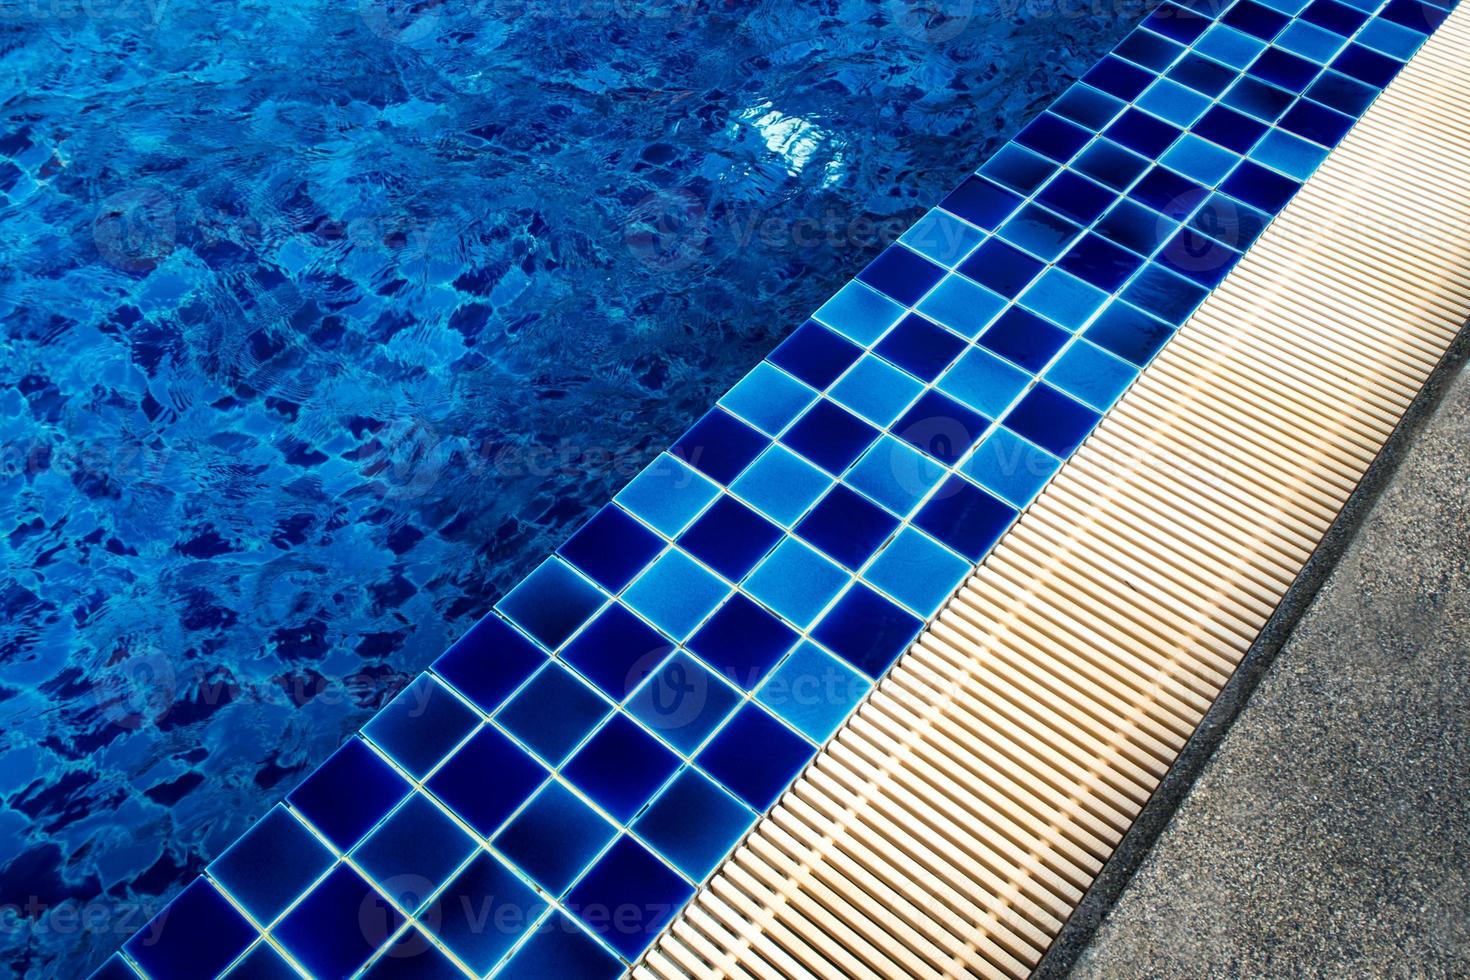 Blue Ceramic tile flooring and drainage gutters beside the pool photo